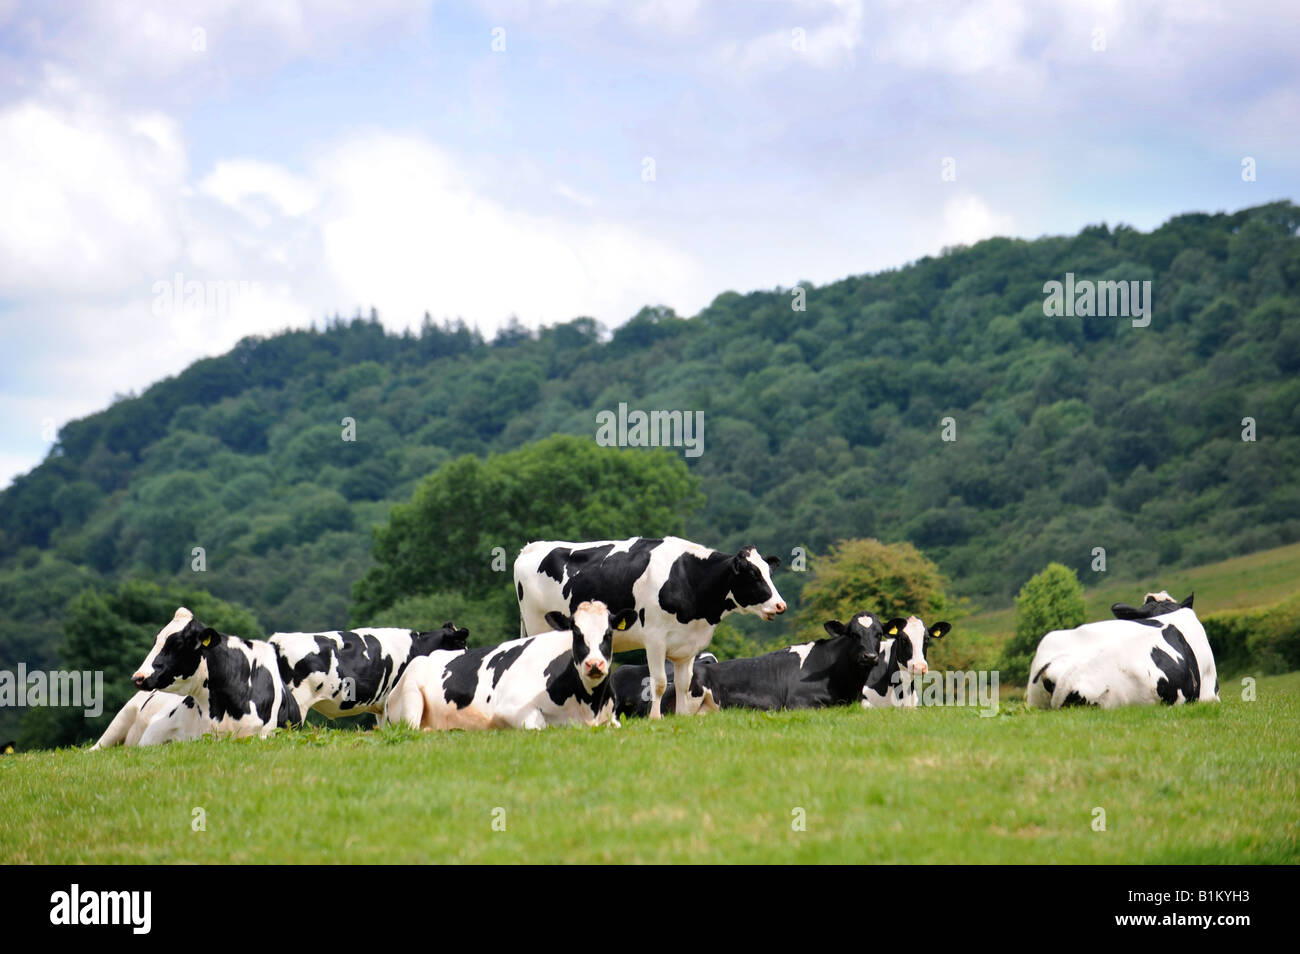 FRIESIAN DAIRY CATTLE IN GWENT WALES NEAR THE HEREFORDSHIRE BORDER UK Stock Photo